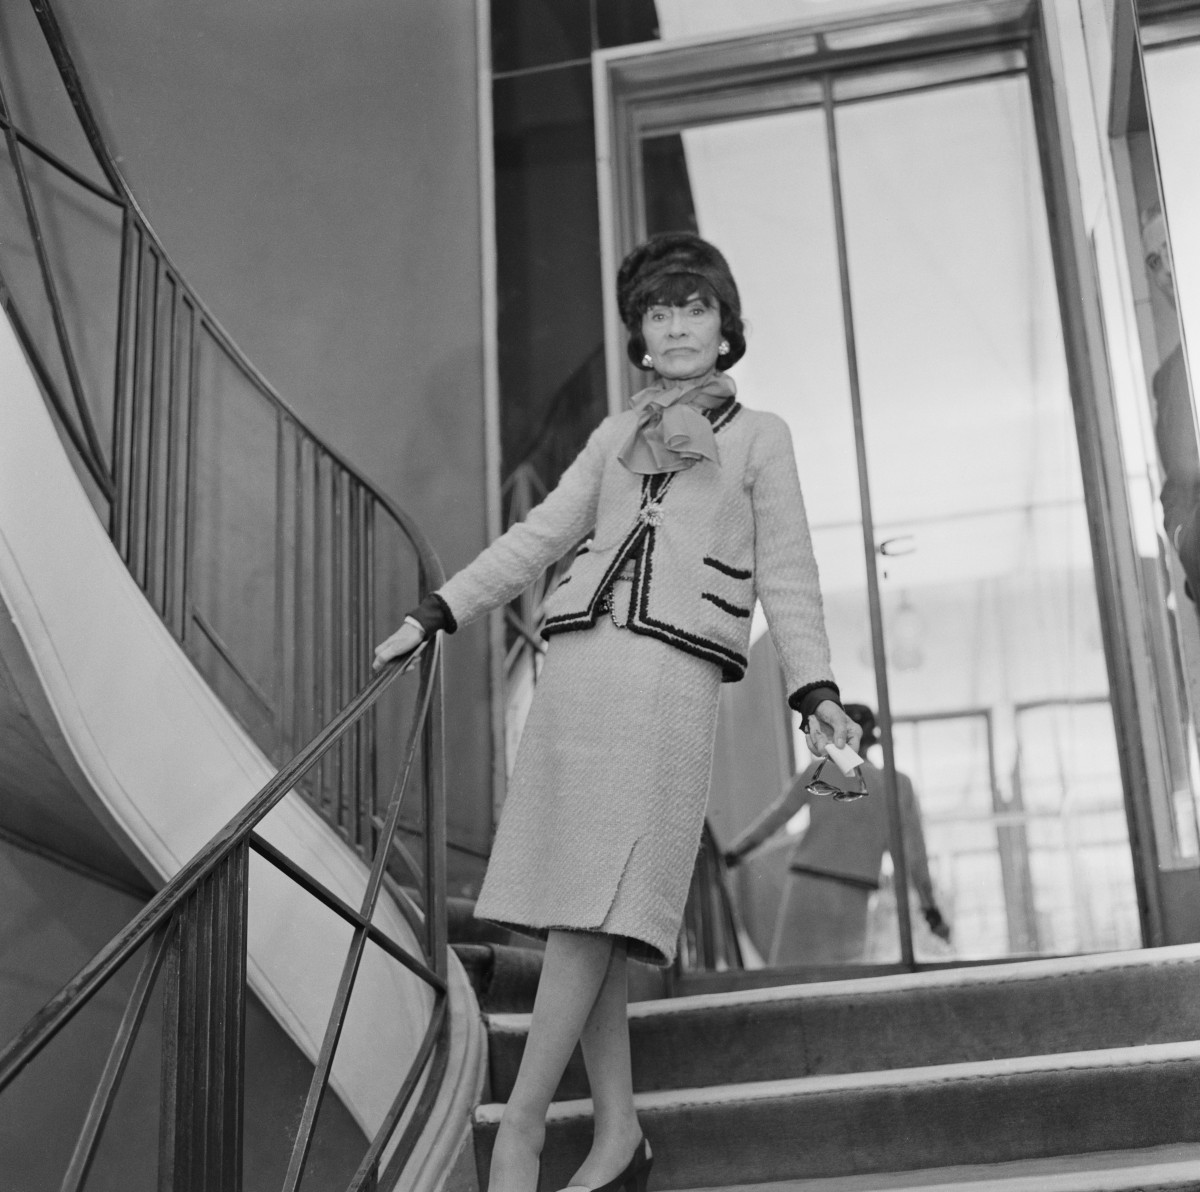  Coco Chanel (1883 - 1971) in Paris, France, 29th January 1963